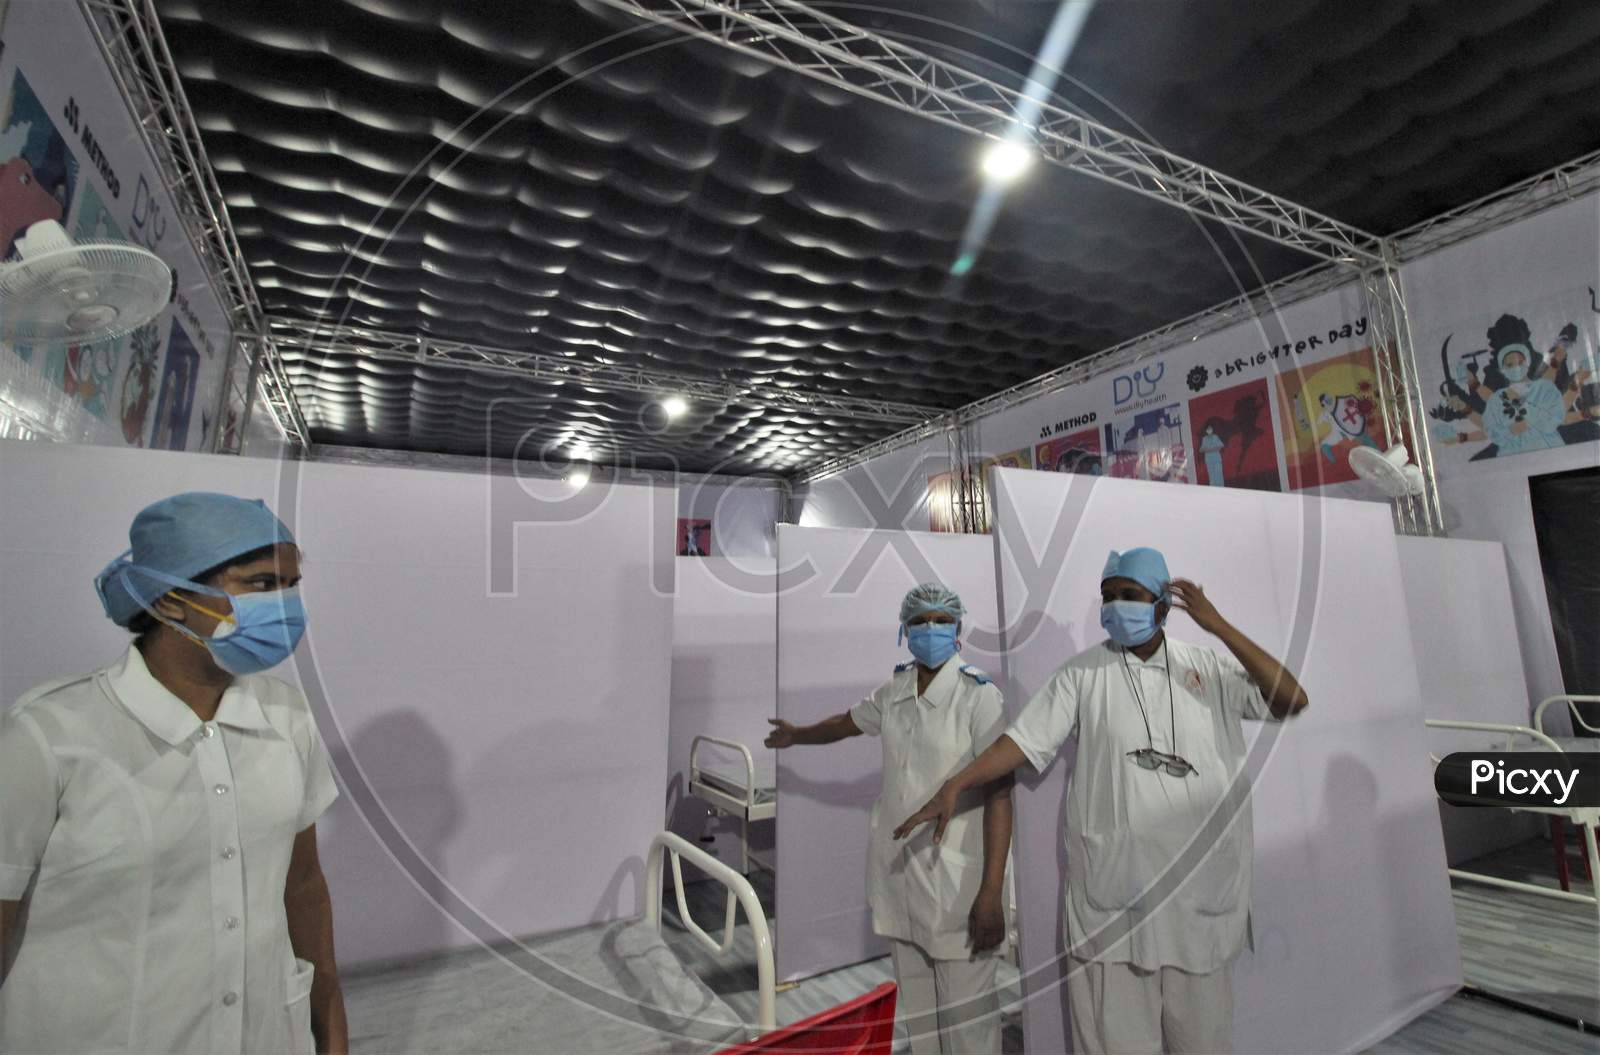 Nurses are seen showing around the newly inaugurated temporary facility created to screen cancer patients for covid-19, in Mumbai, India on July 30, 2020.